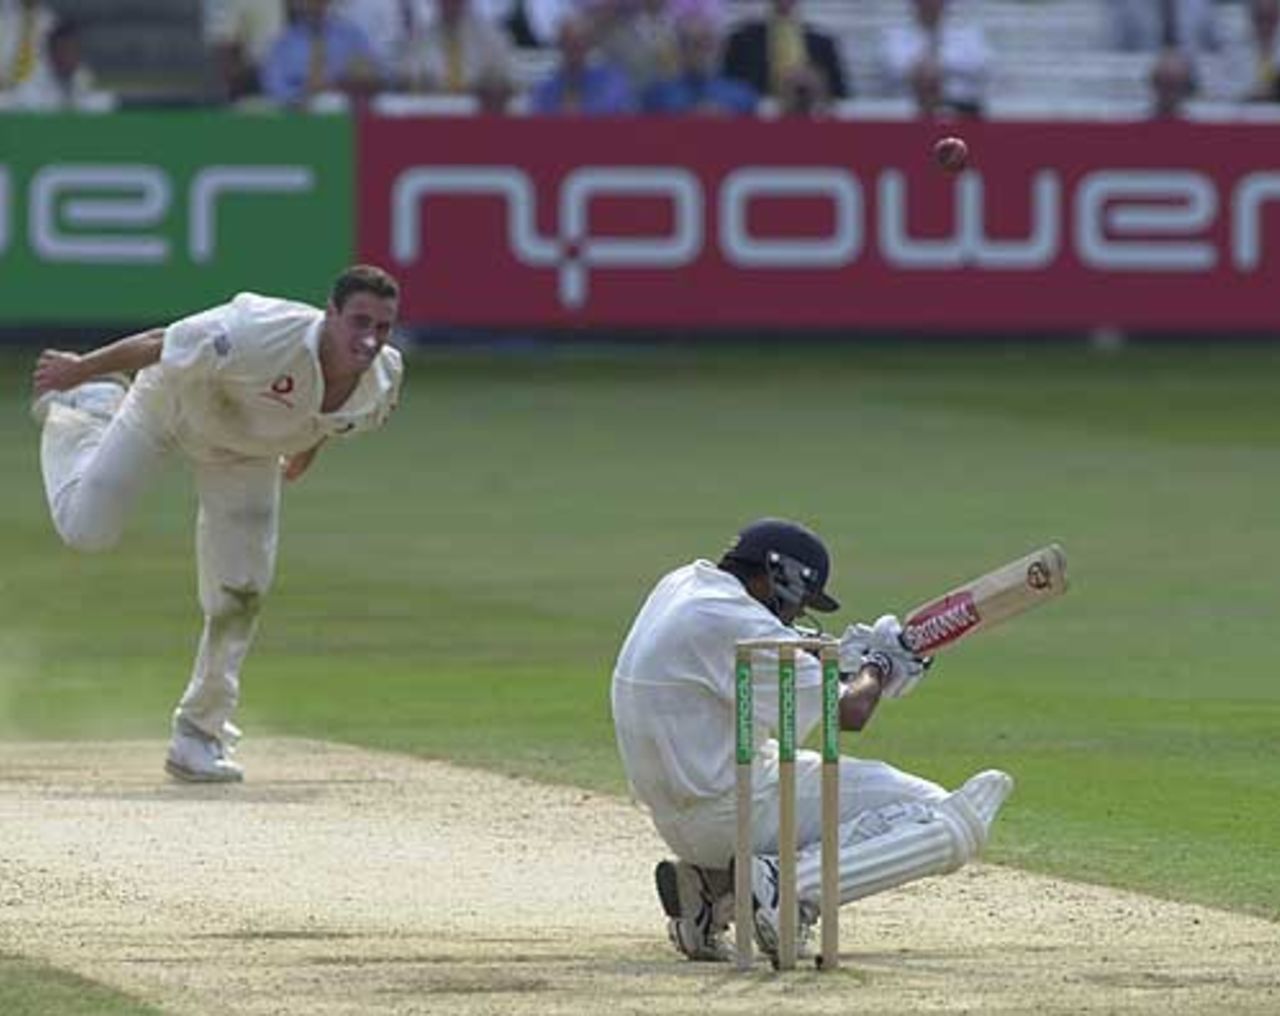 Jones delivers a bouncer to Dravid, England v India 1st npower Test at Lord's